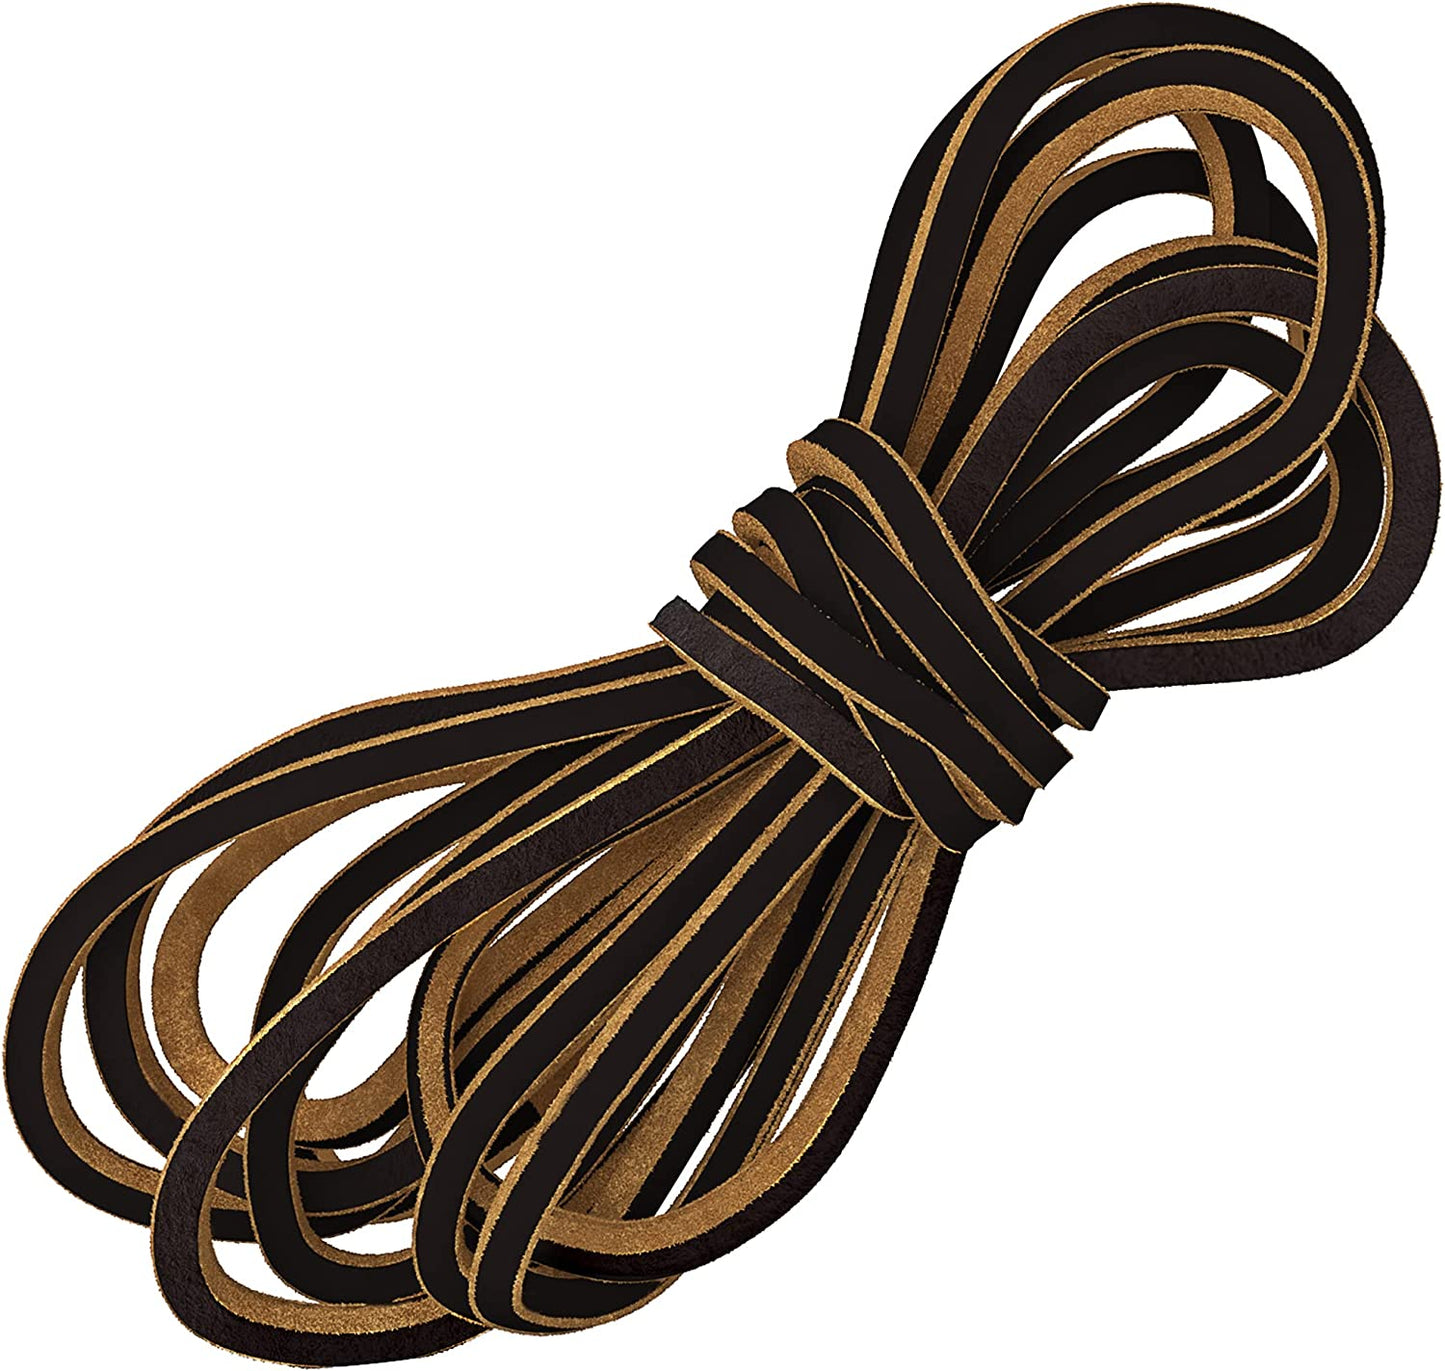 Rawling High Quality Leather Laces For Boots And Shoes, 27, Brown  (Chocolate Brown)